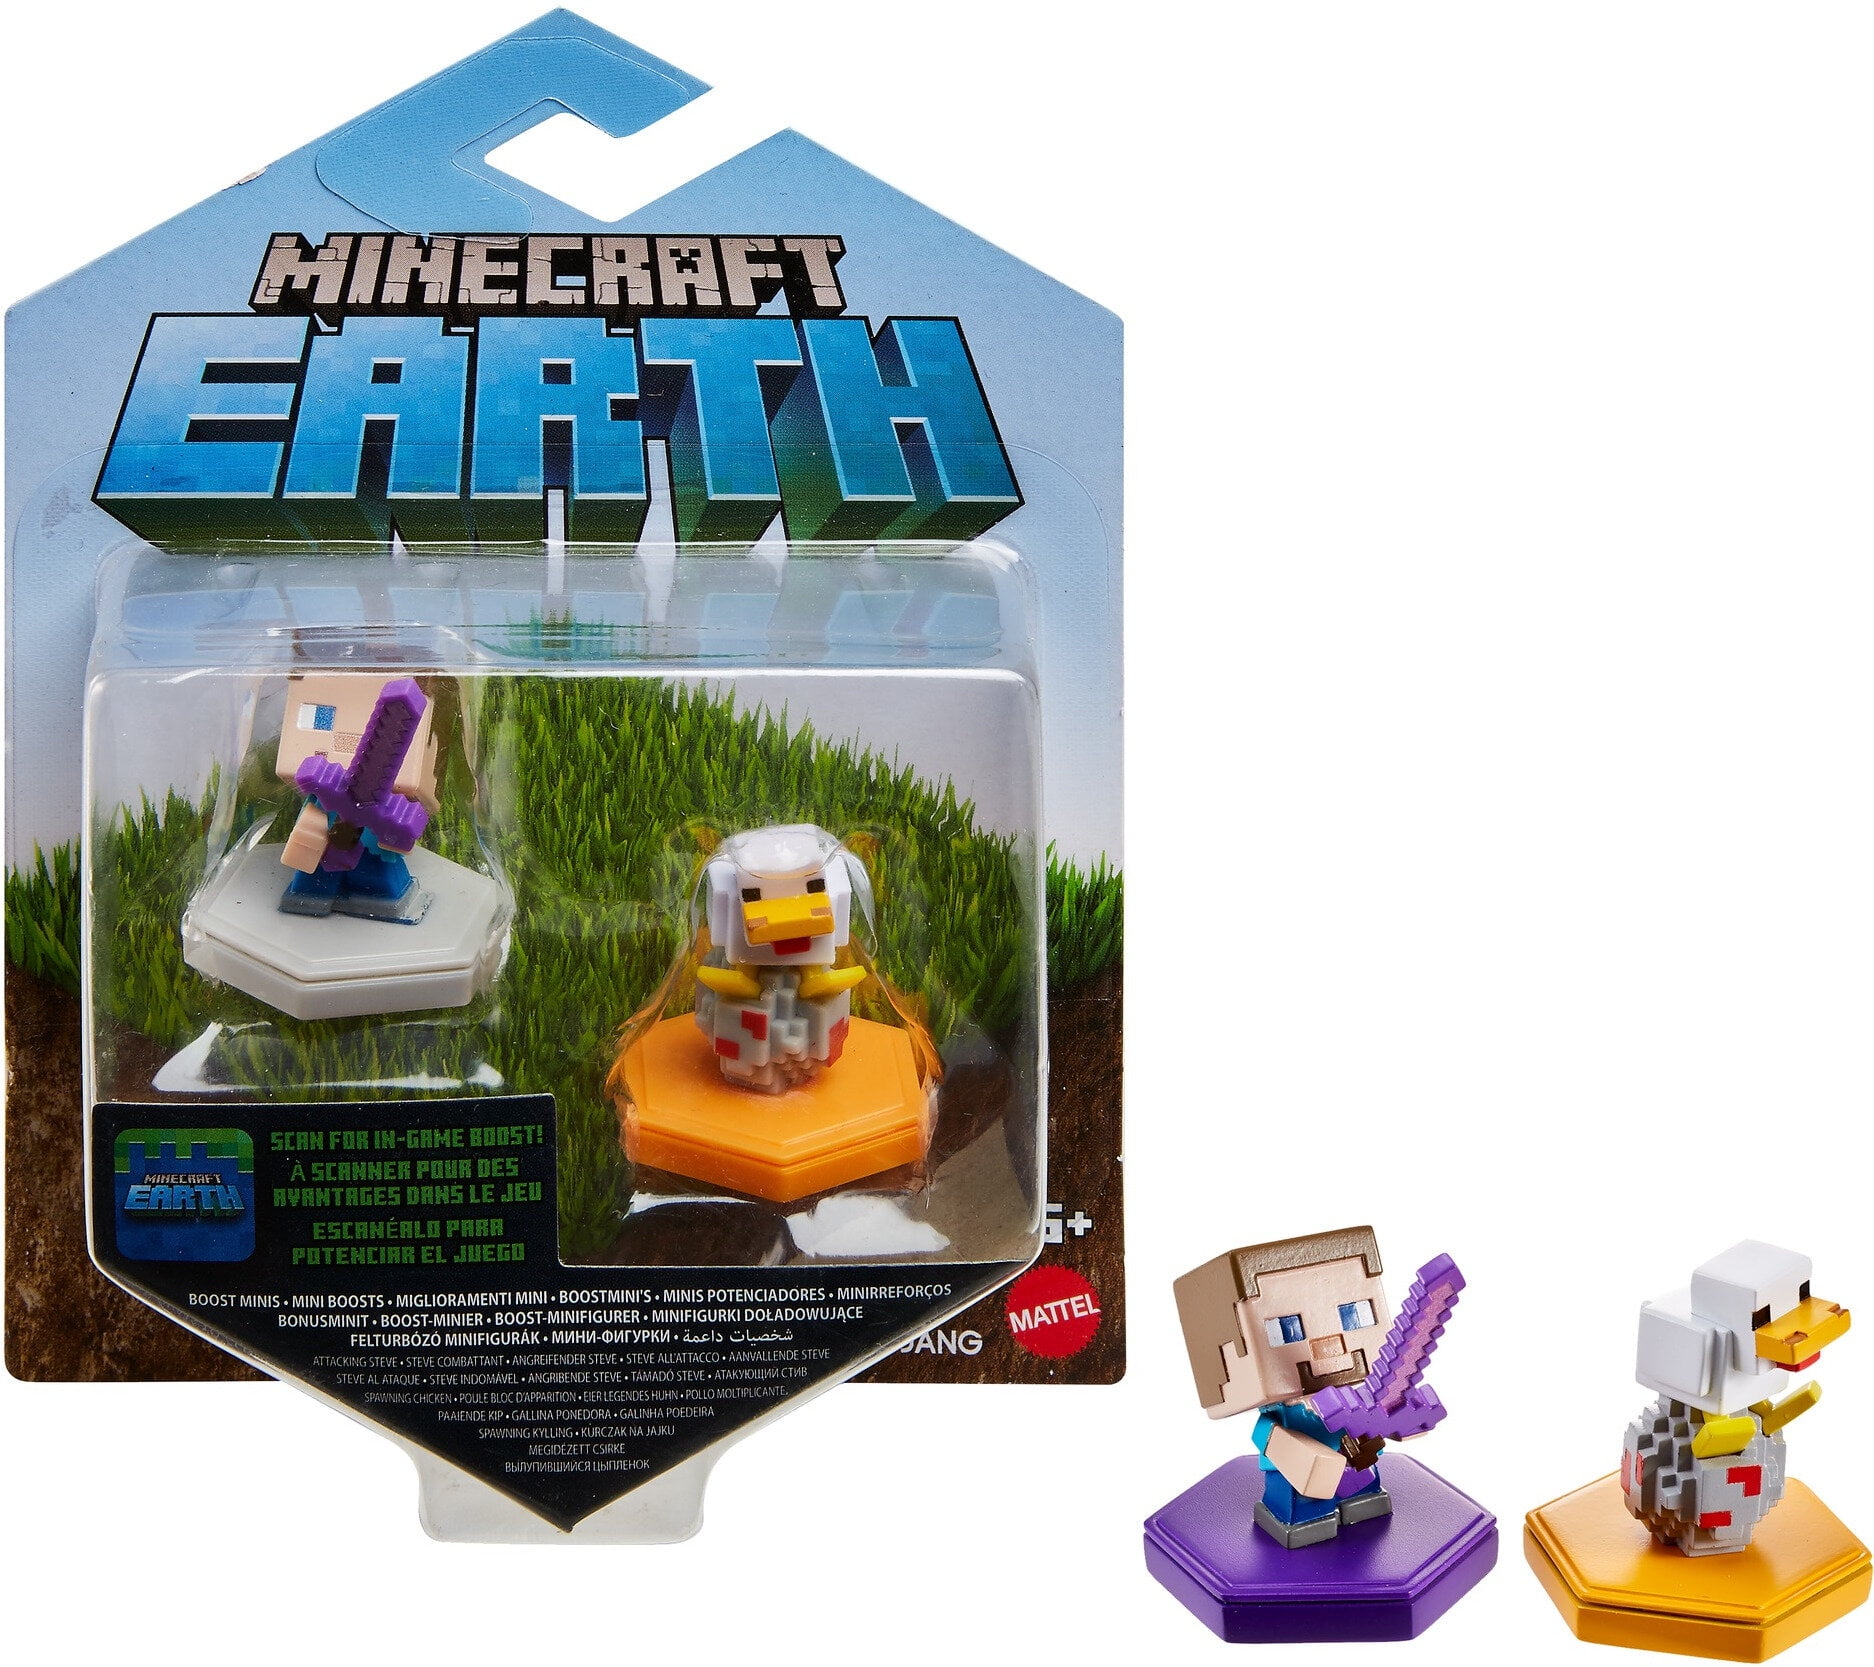 Minecraft Earth Boost Mini Attacking Steve  Spawning Chicken Figure 2-Pack,  NFC Chip Enabled For Play With Minecraft Earth Augmented Reality Mobile  Device Game, Toys For Girls And Boys Age And